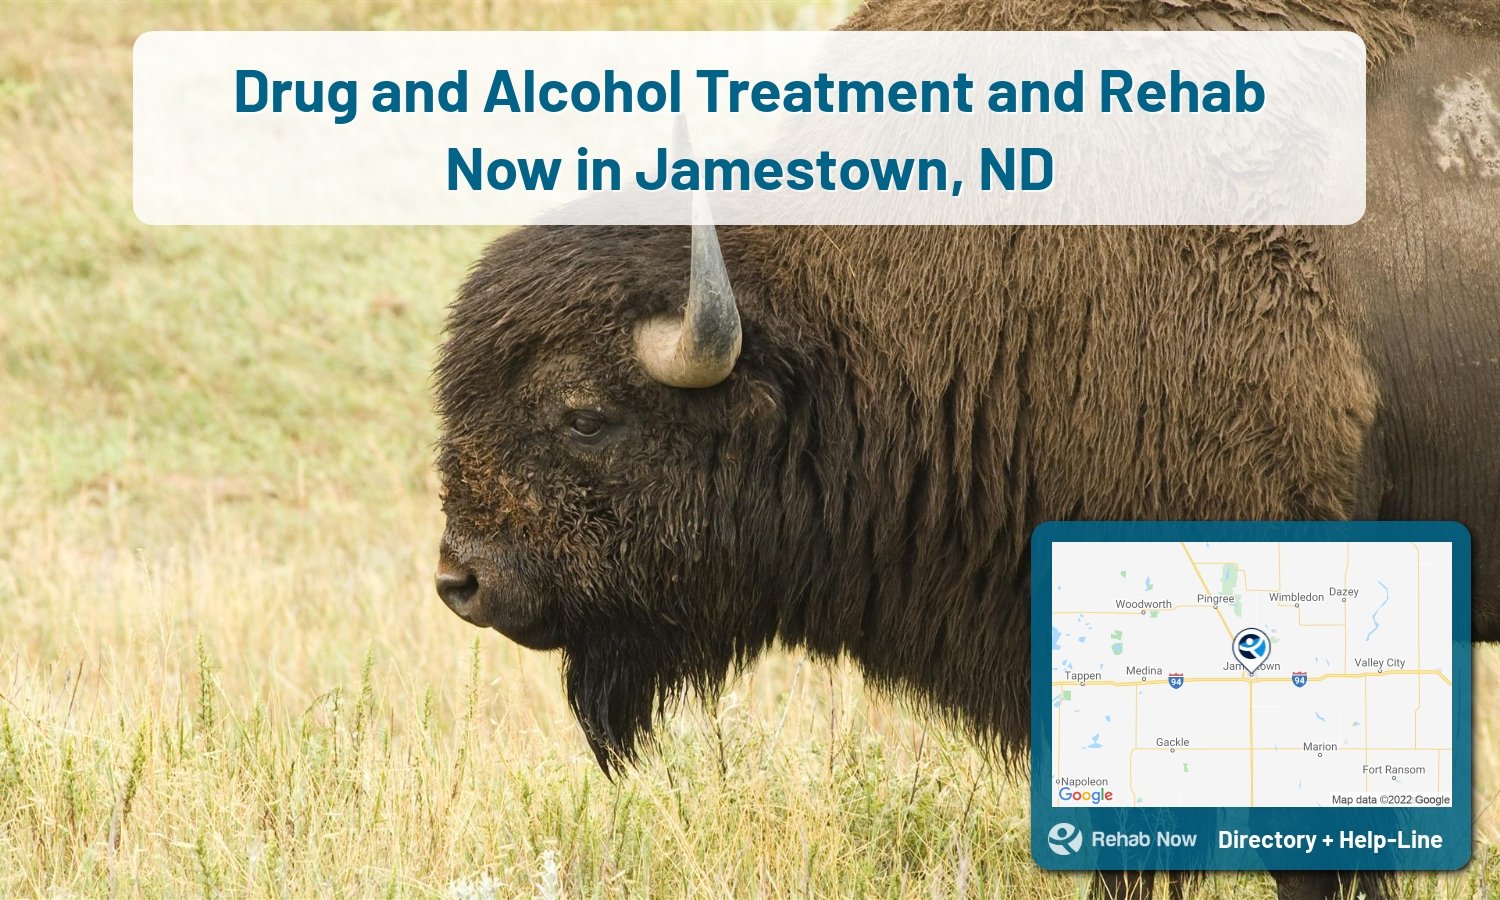 Let our expert counselors help find the best addiction treatment in Jamestown, North Dakota now with a free call to our hotline.